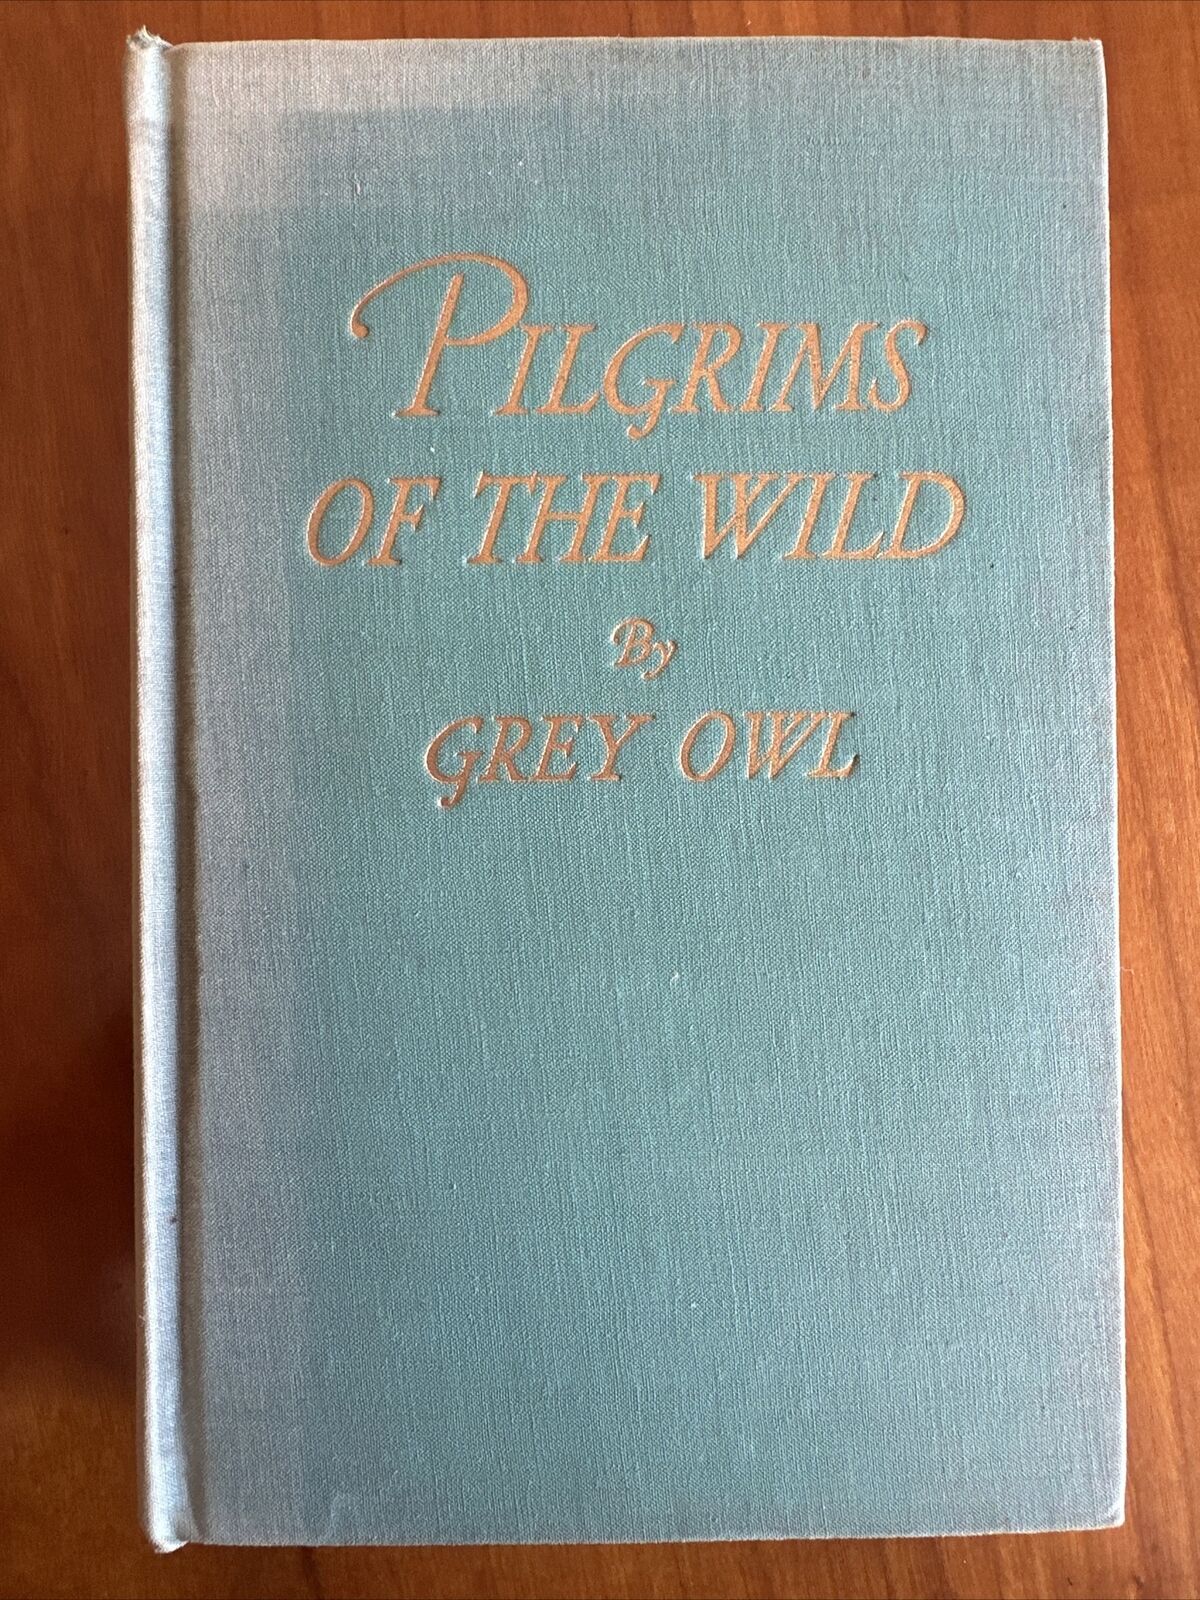 Pilgrims Of The Wild By Grey Owl HC 1st Edition 1935 Illustrated